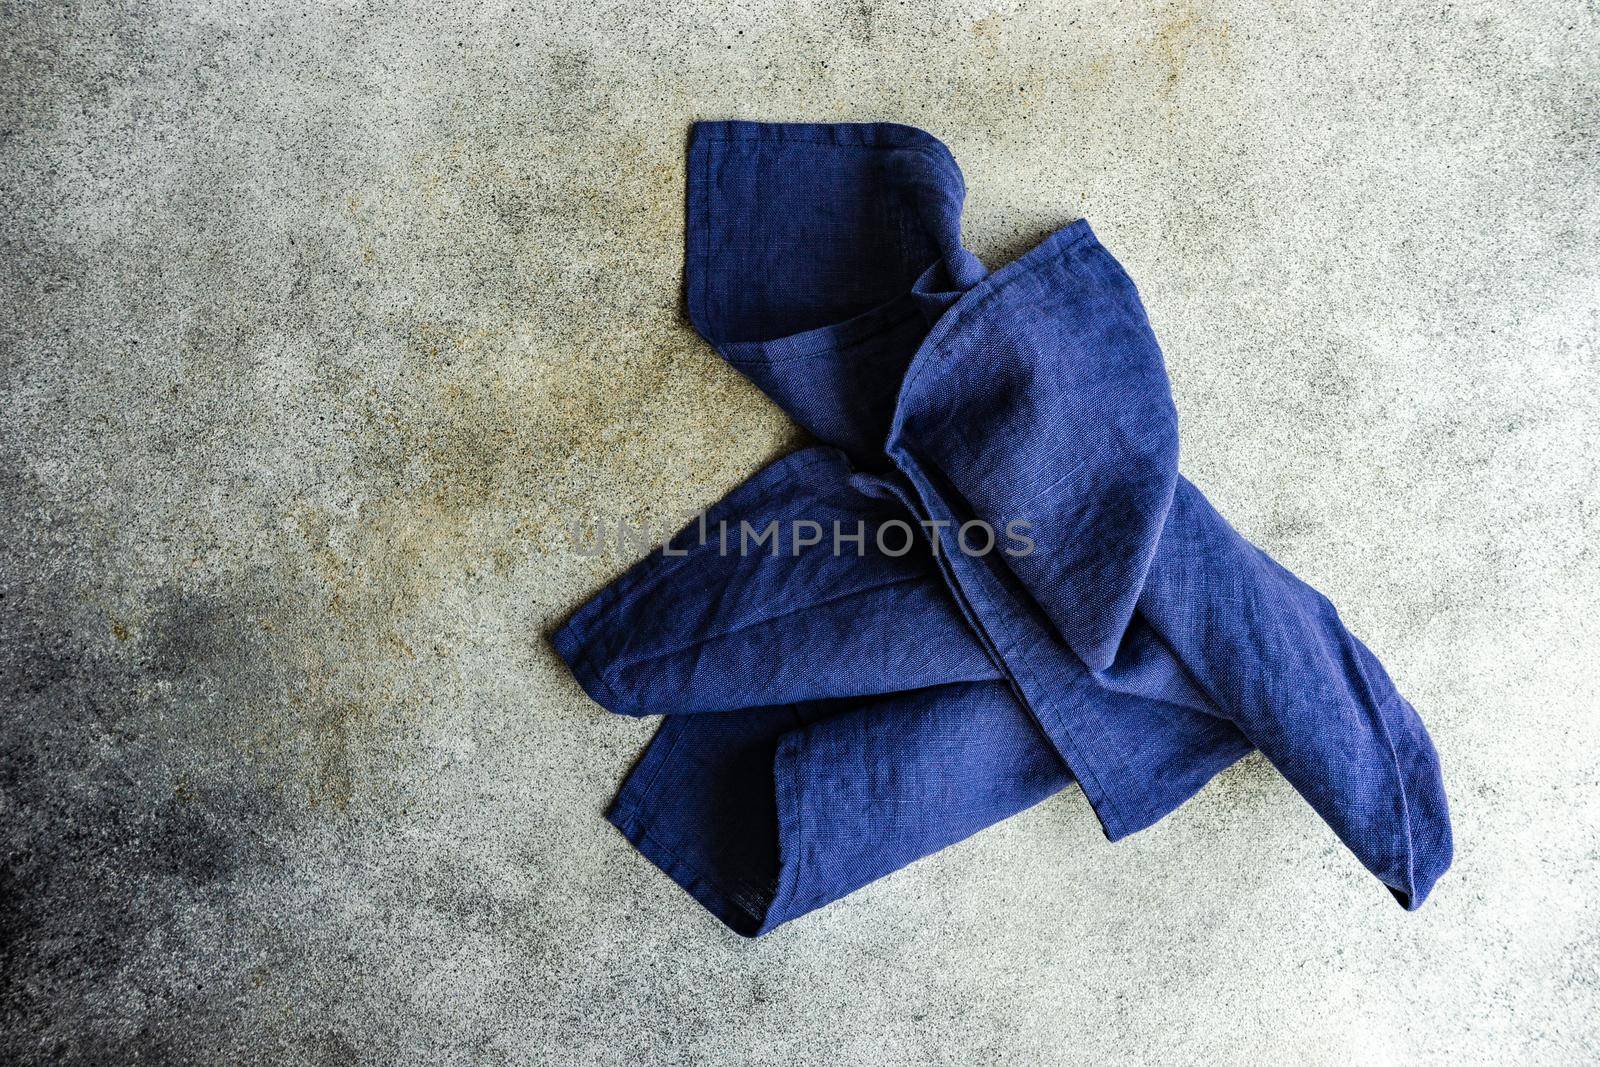 Kitchen textile towel on concrete table background with copy space